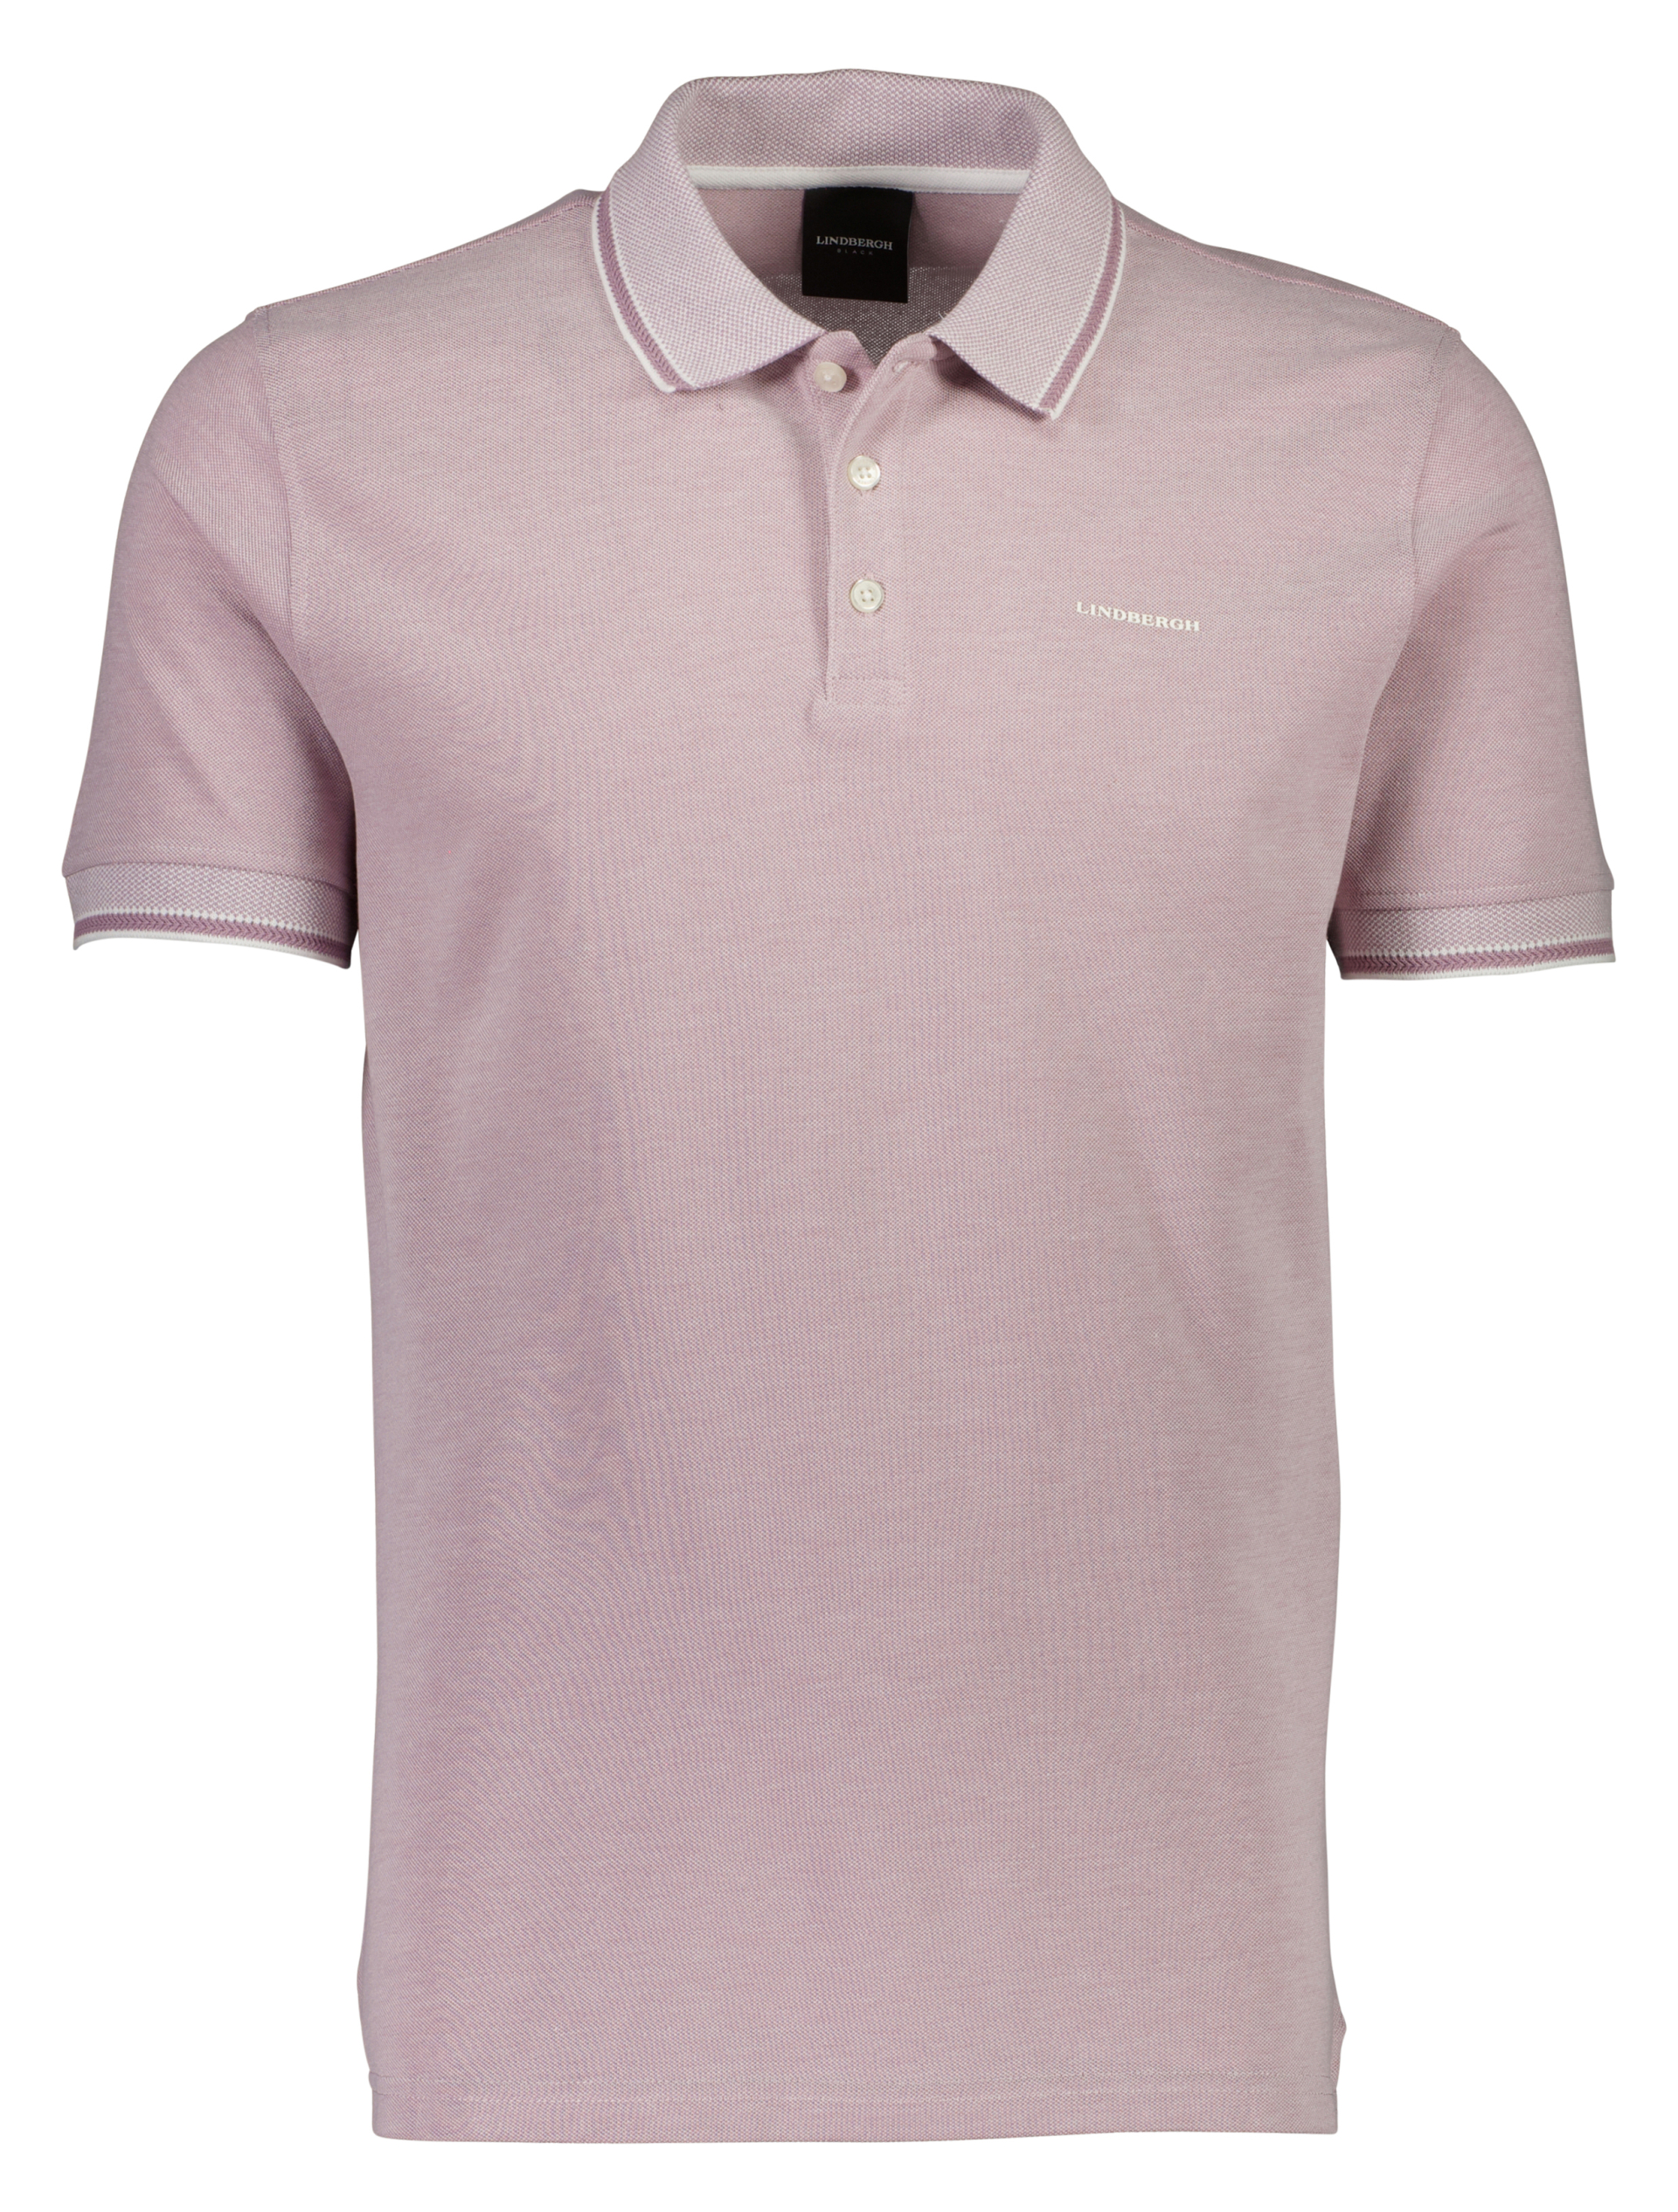 Lindbergh Polo shirt red / dusty pink